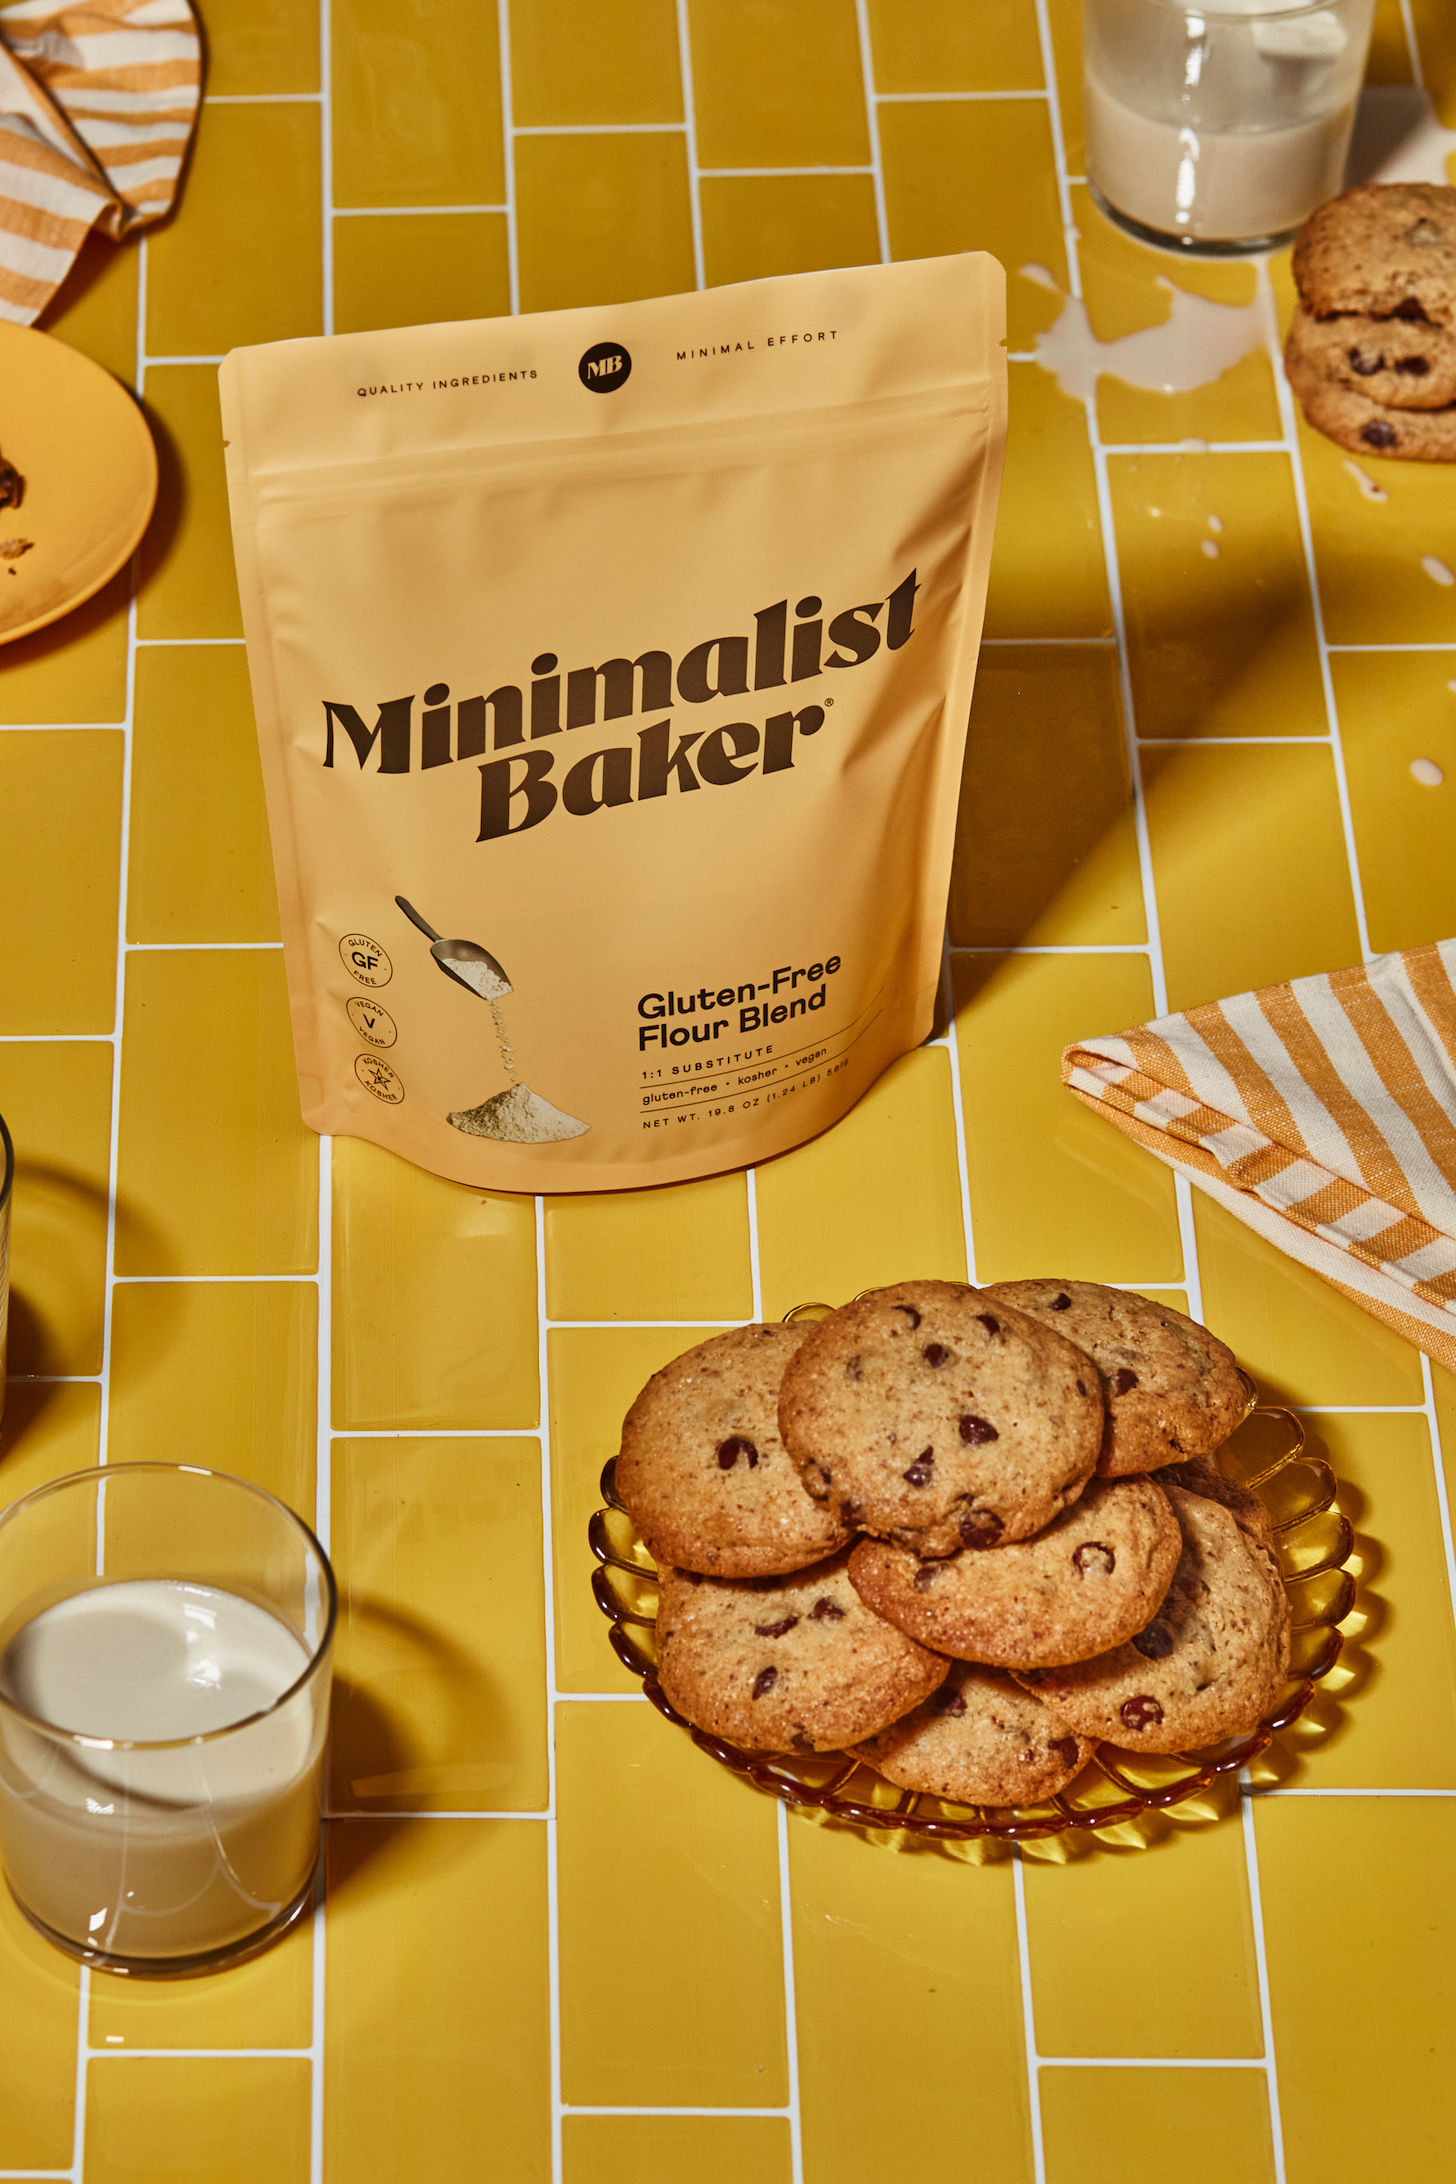 Bag of our amazing gluten-free flour blend next to a plate of chocolate chip cookies and dairy-free milk